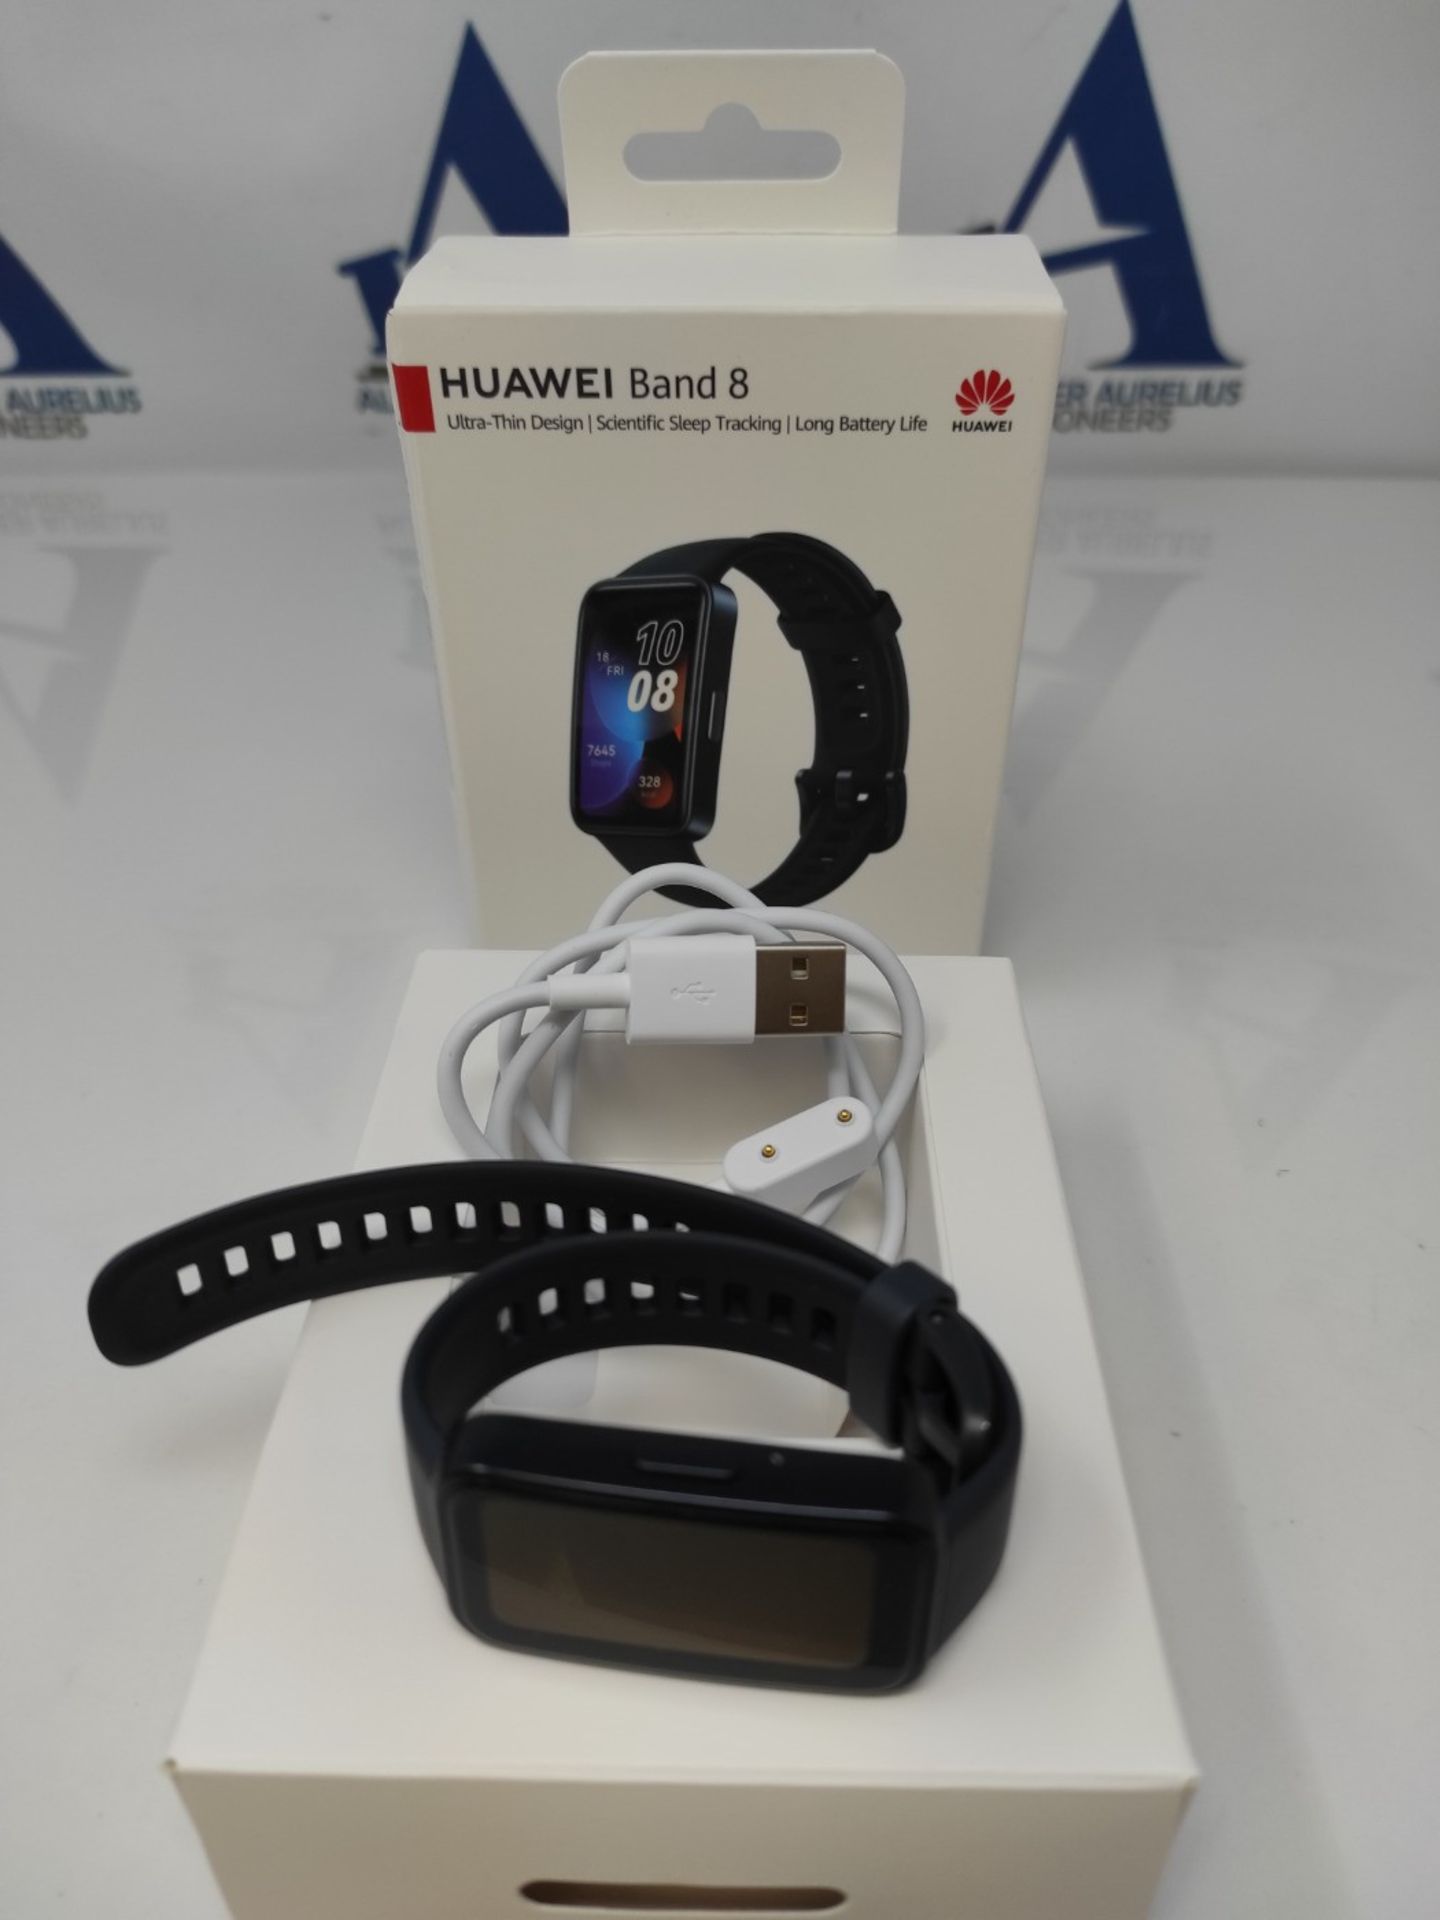 HUAWEI Band 8 Fitness Watch - Ultra Thin Smart Band design with Up to 2 Weeks Battery - Image 2 of 2